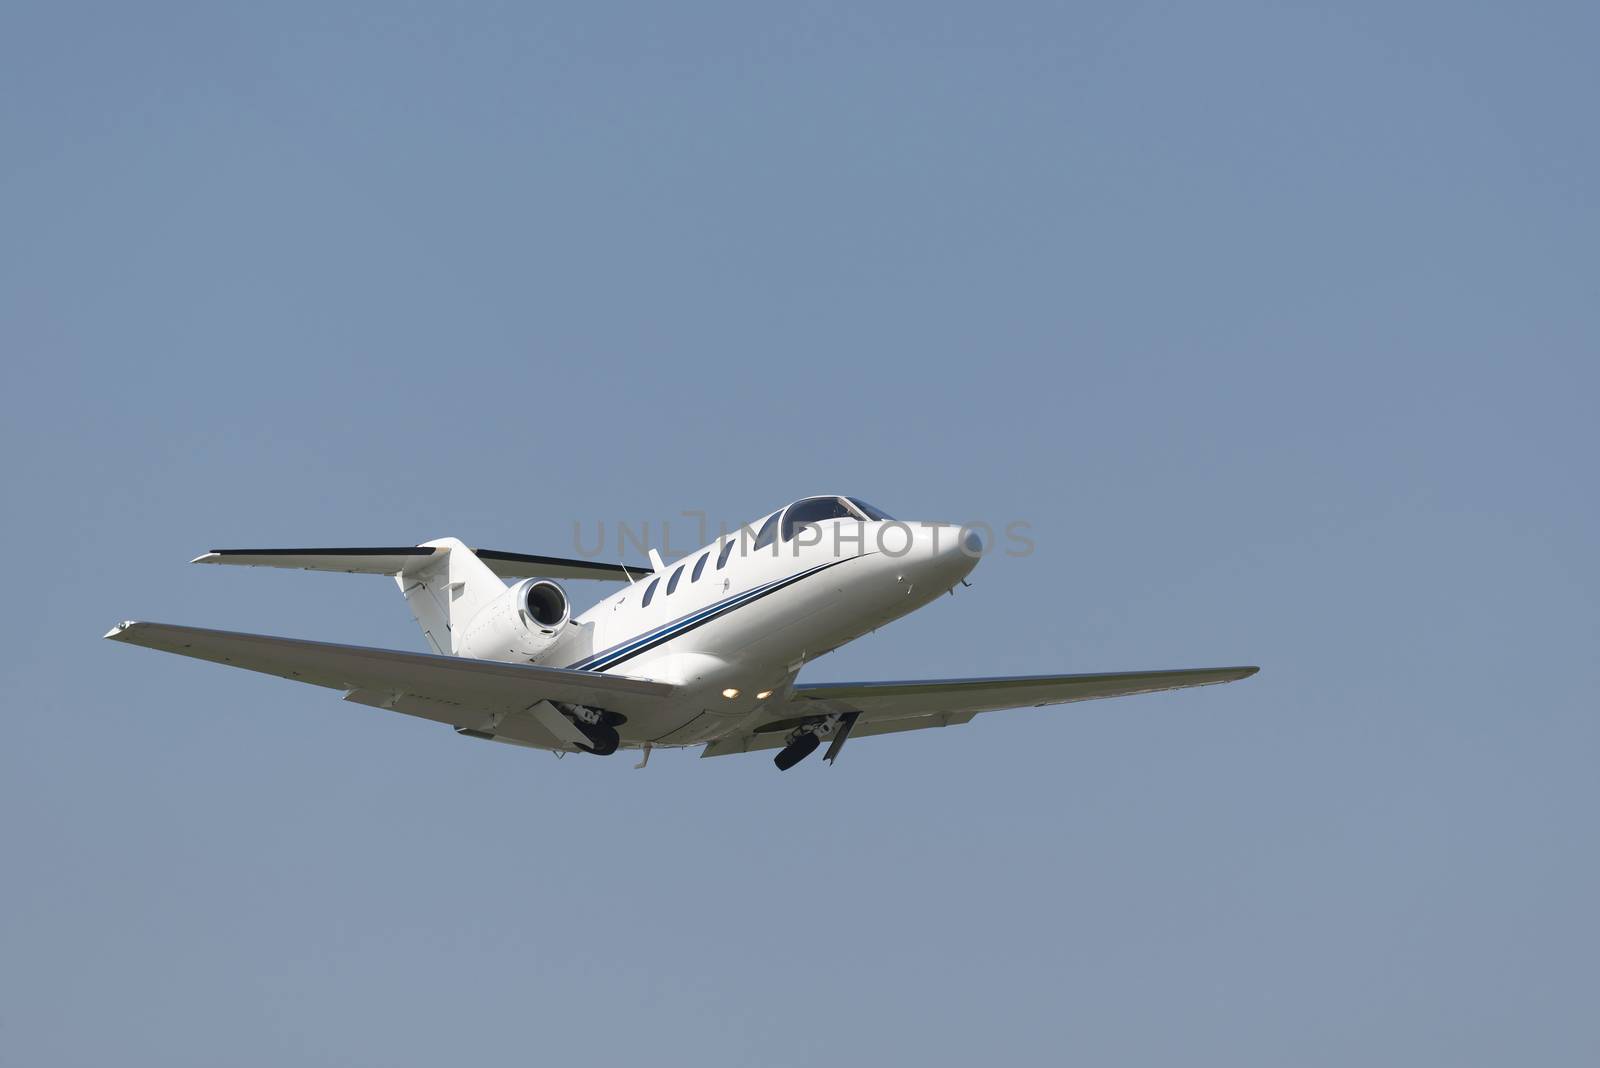 Business Jet directly after takeoff accelerating with withdrawing landing gear
